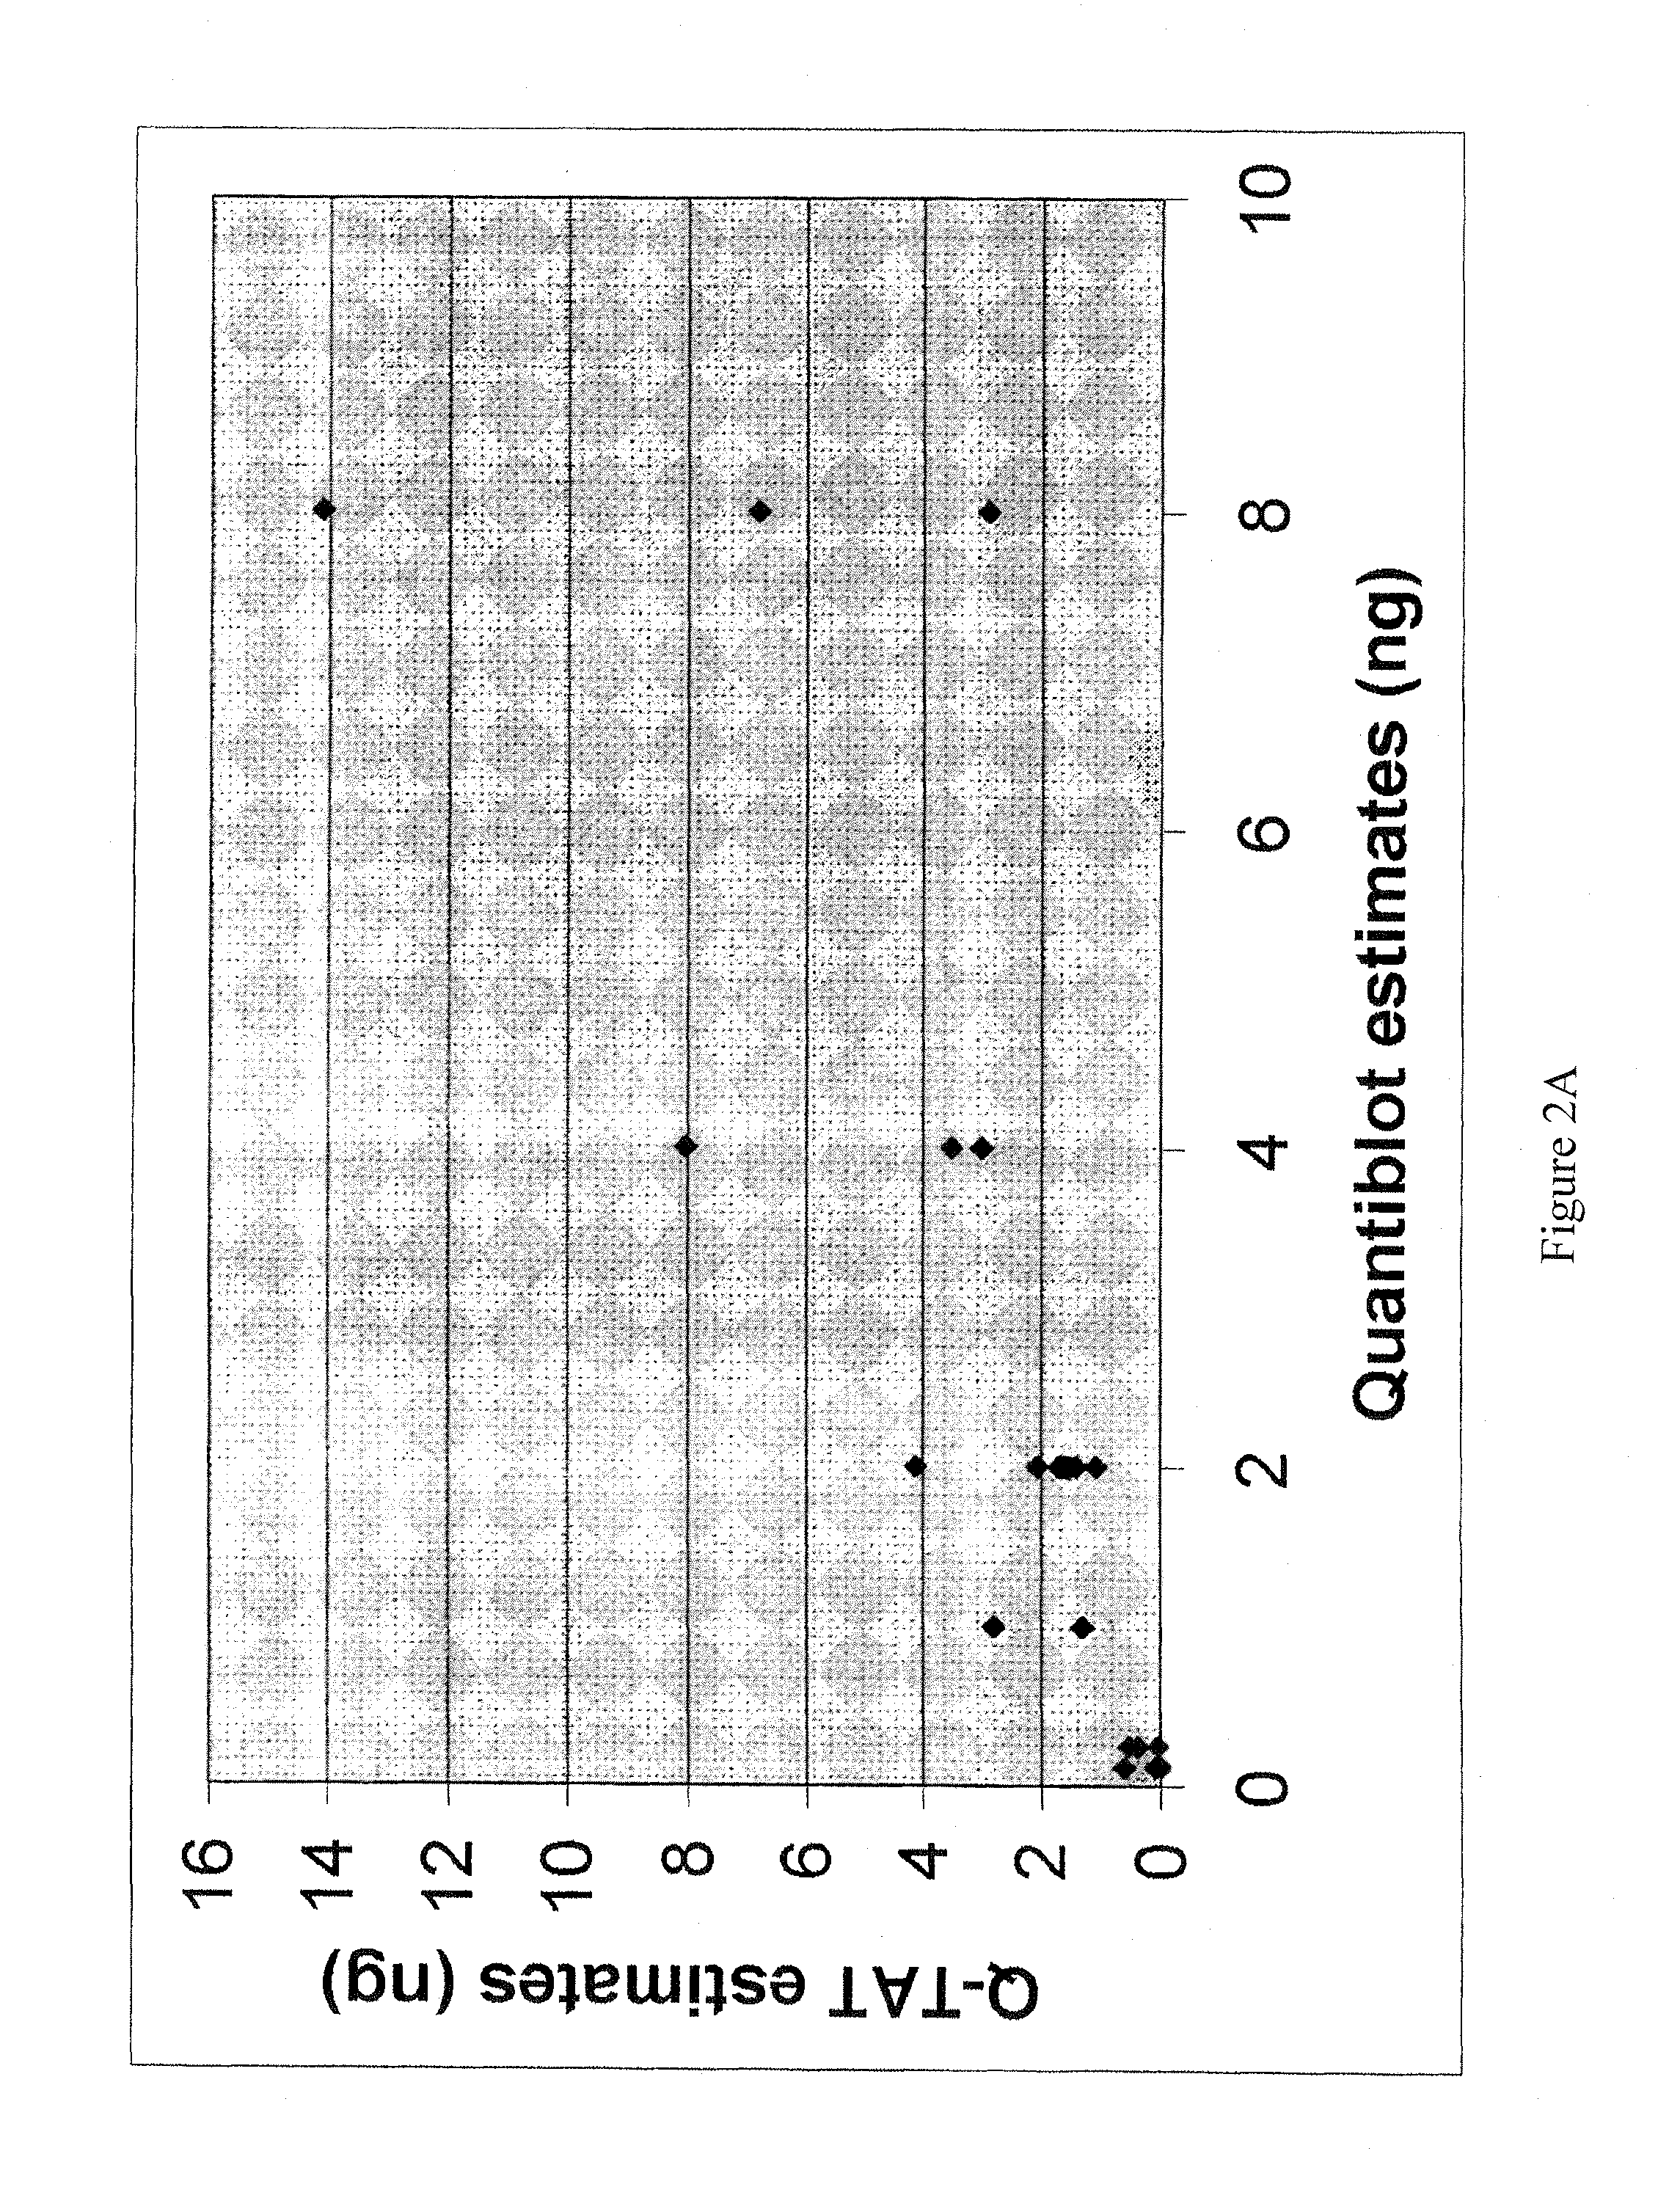 Method for simultaneously determining in a single multiplex reaction gender of donors and quantities of genomic DNA and ratios thereof, presence and extent of DNA degradation, and PCR inhibition within a human DNA sample